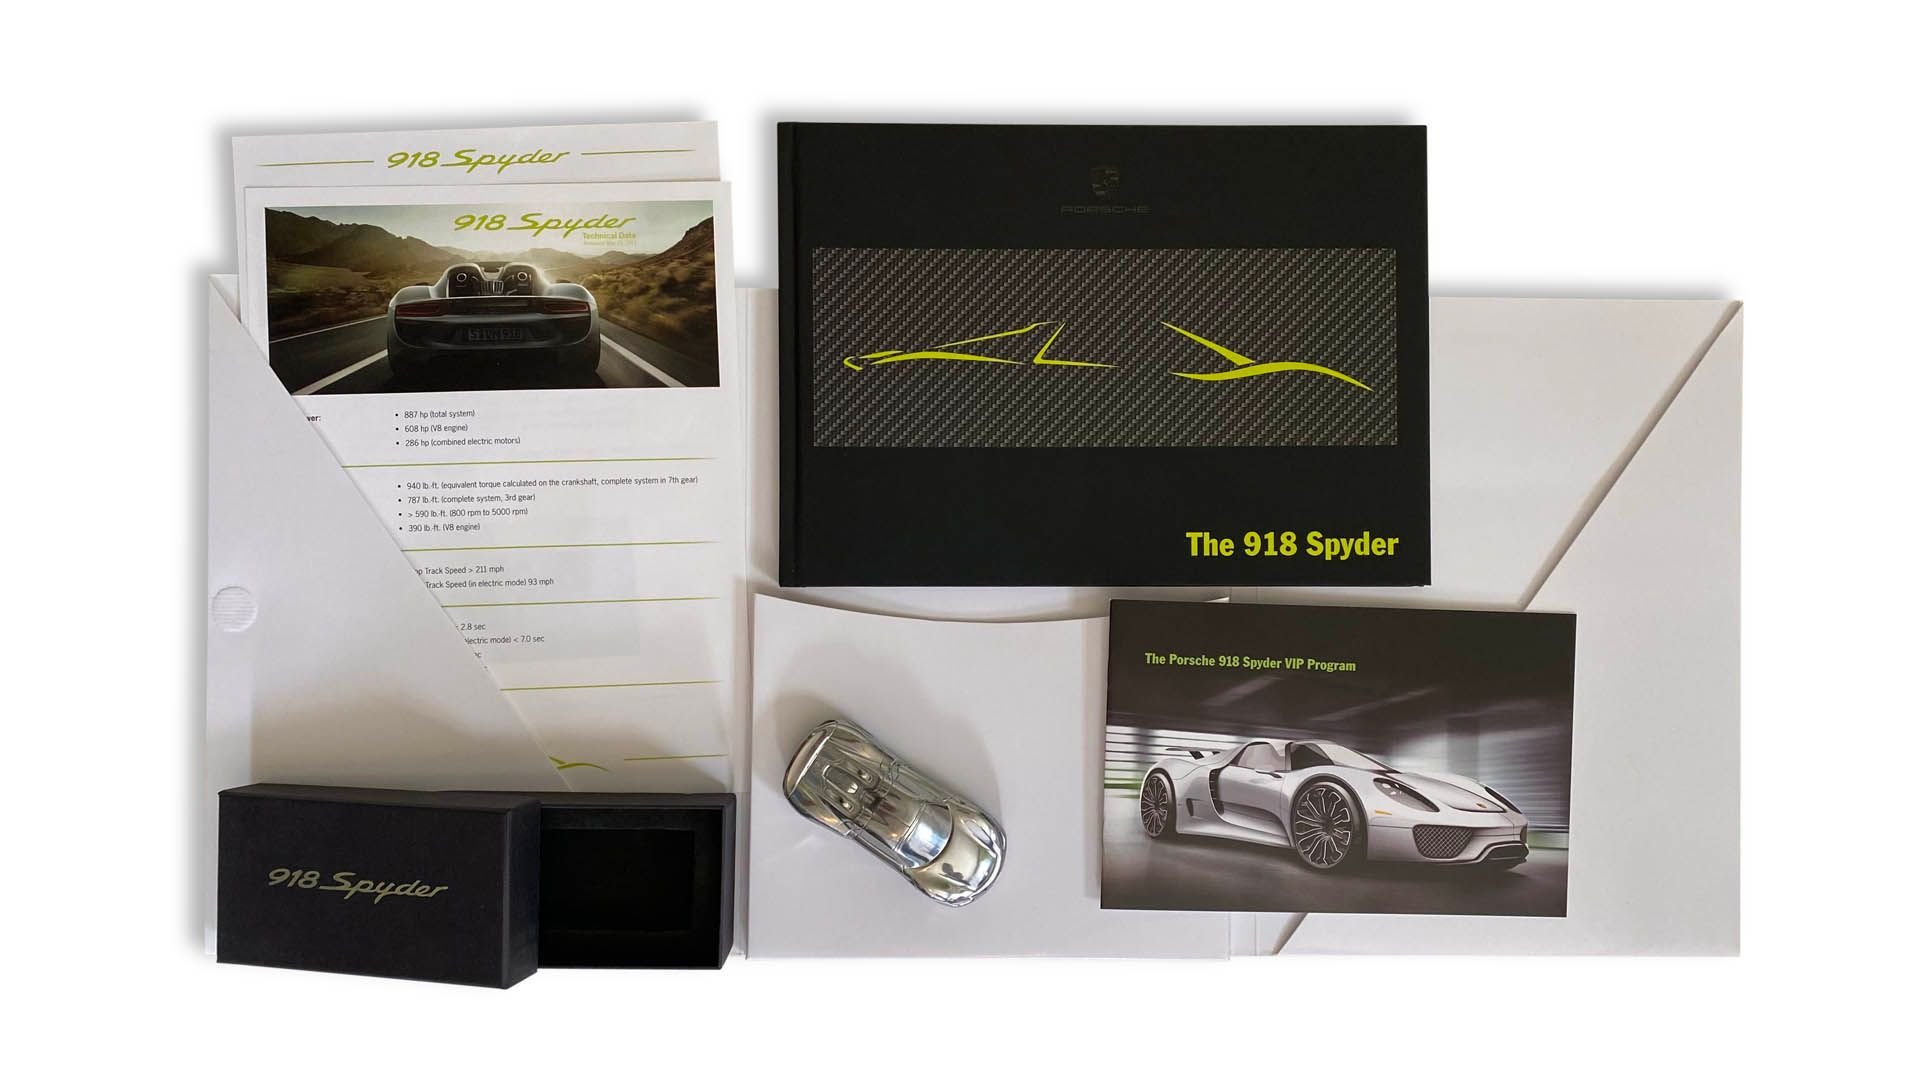 For Sale Porsche 918 Spyder VIP Order and Delivery Items